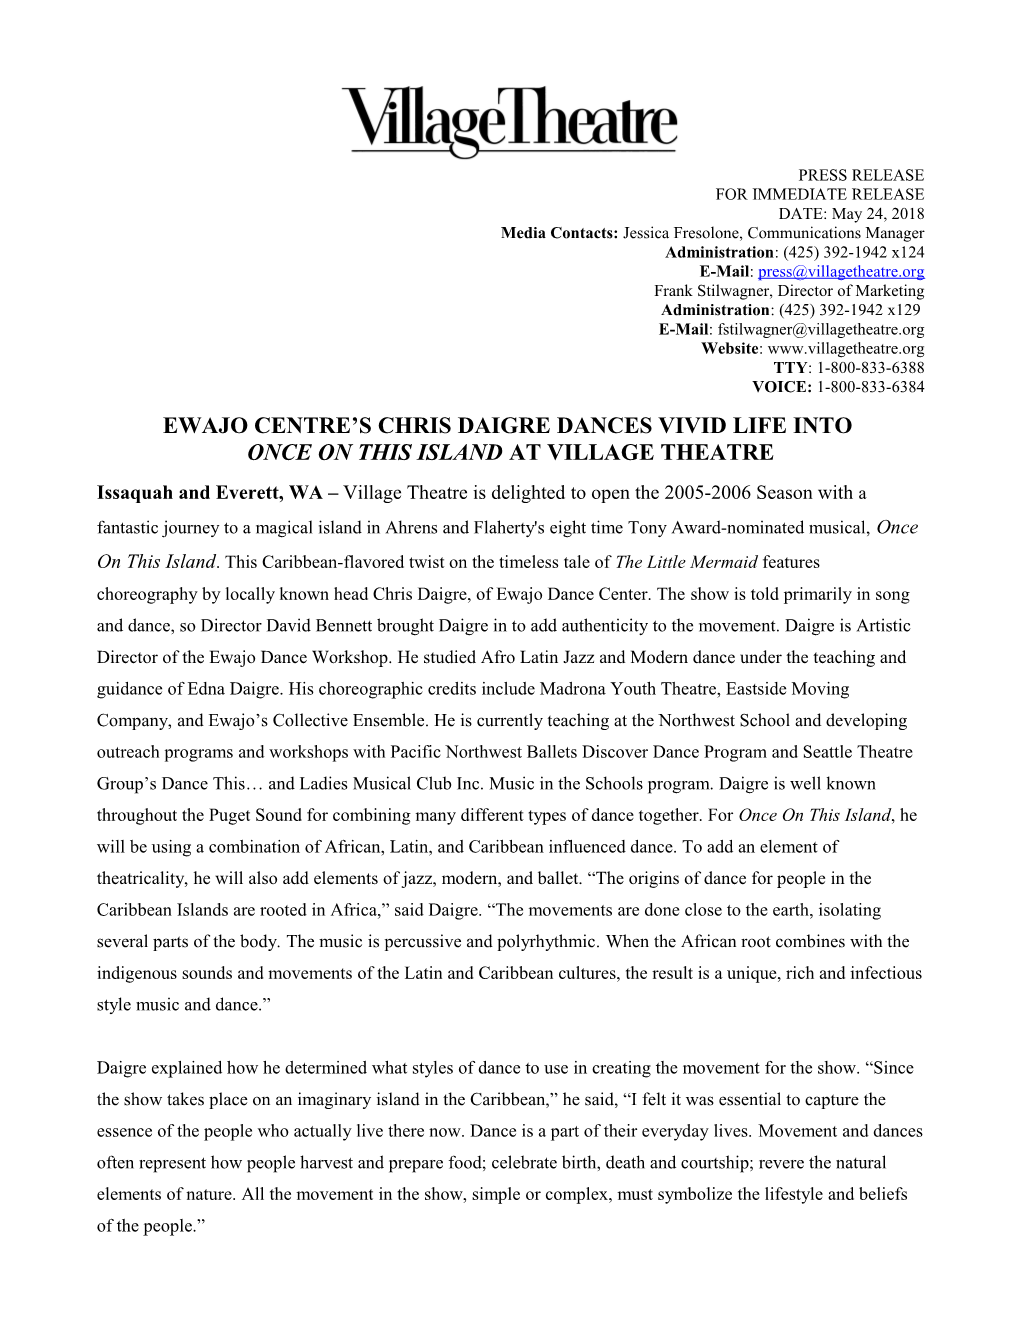 FOR IMMEDIATE RELEASE: March 22, 2002 s7